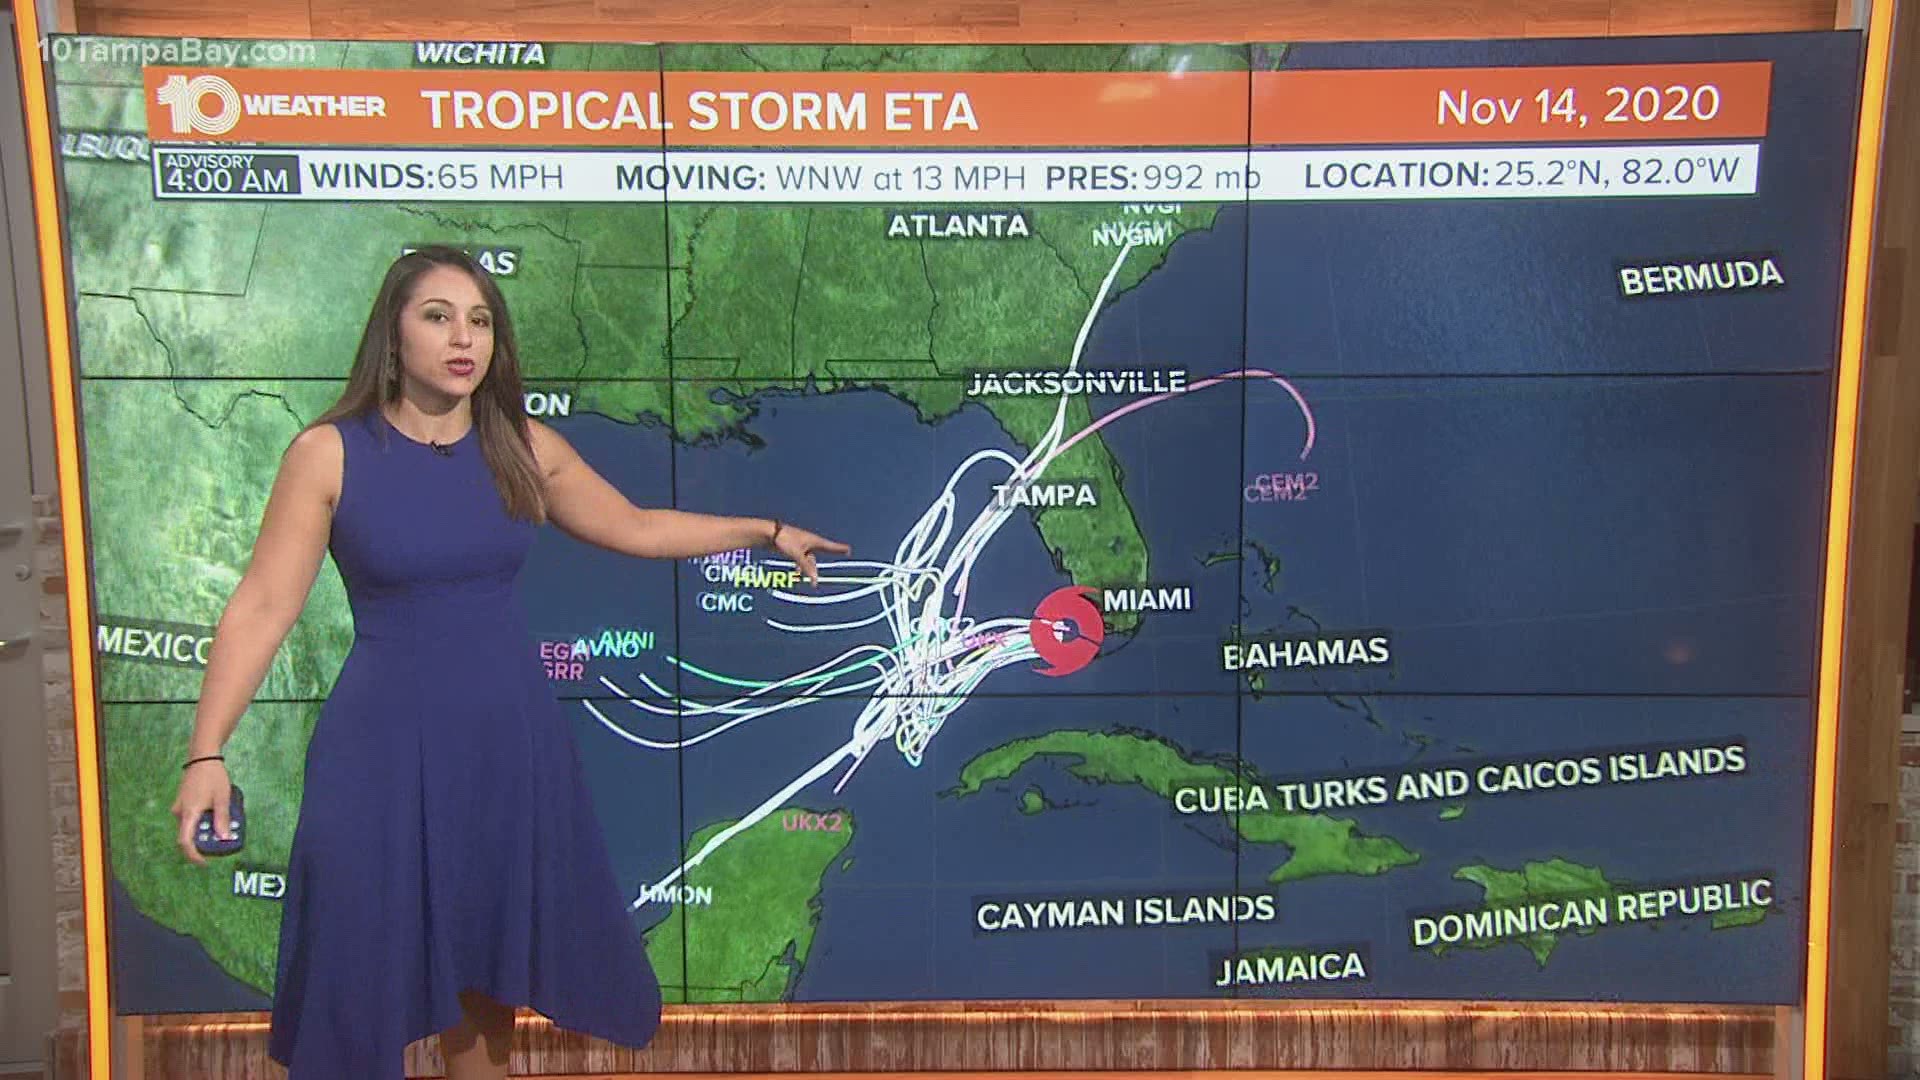 Tropical Storm Eta is bringing rain and windy conditions to the Tampa Bay area Monday morning.